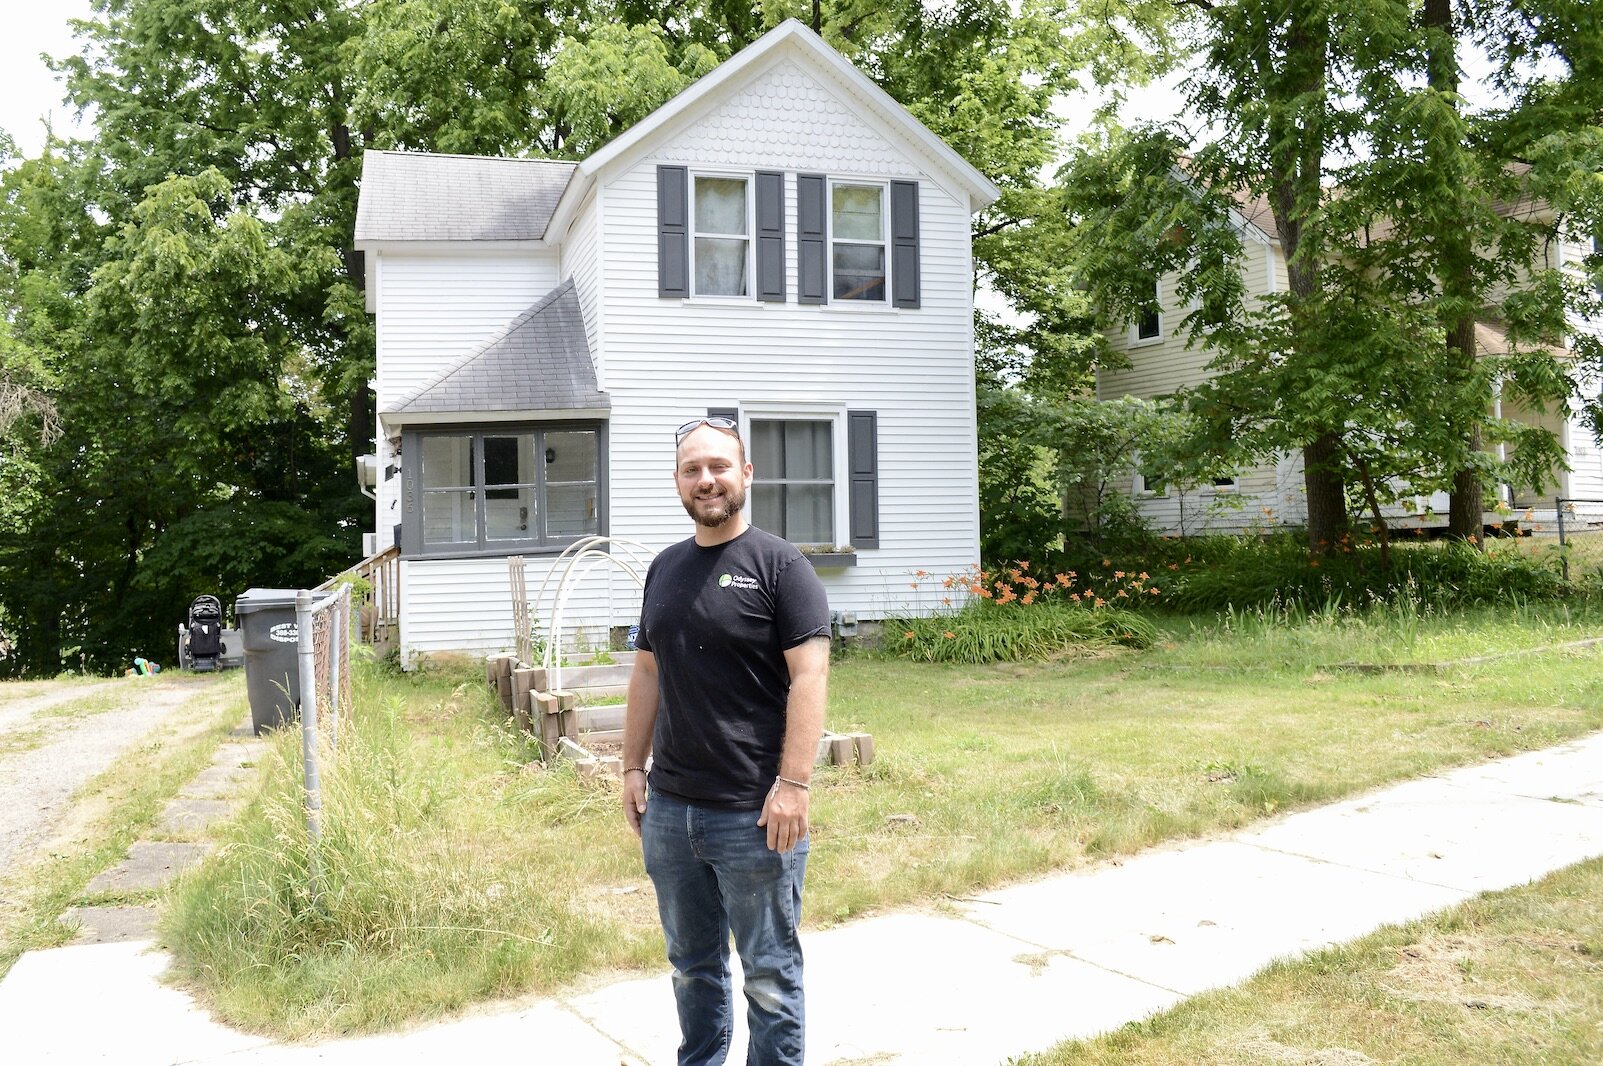 A few houses down from his rehab project at 1028 Denner is one of Tardani's finished homes. "There's a beautiful family living there now, of five."